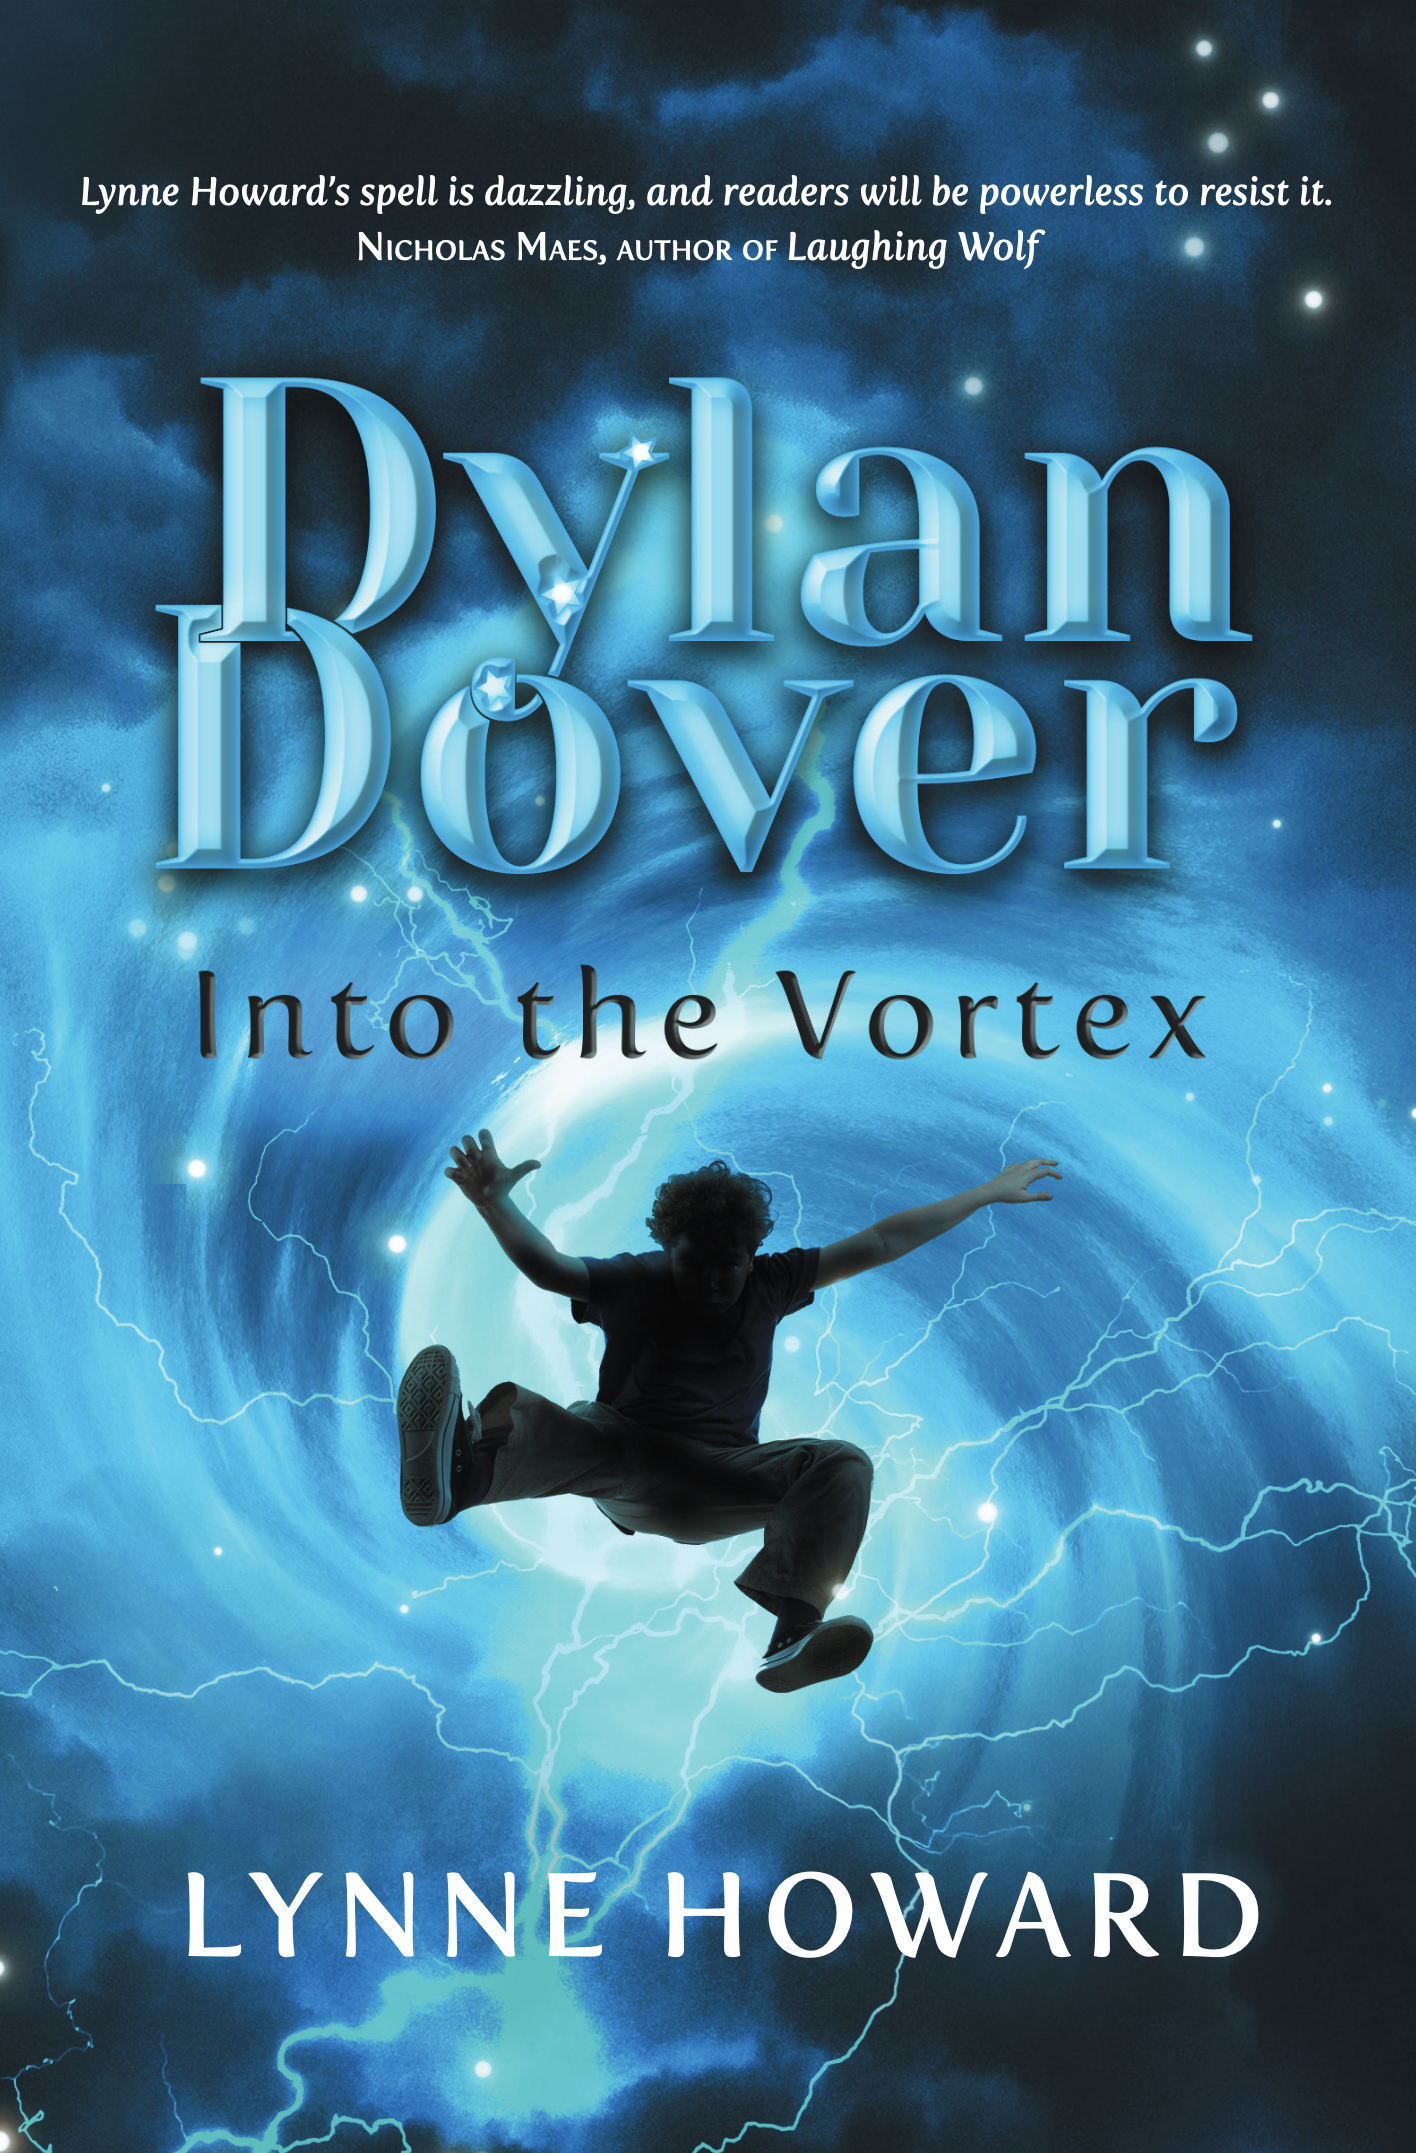 Exclusive Trailer Reveal + Giveaway: Dylan Dover: Into the Vortex (Lynne Howard) ~US/CAN